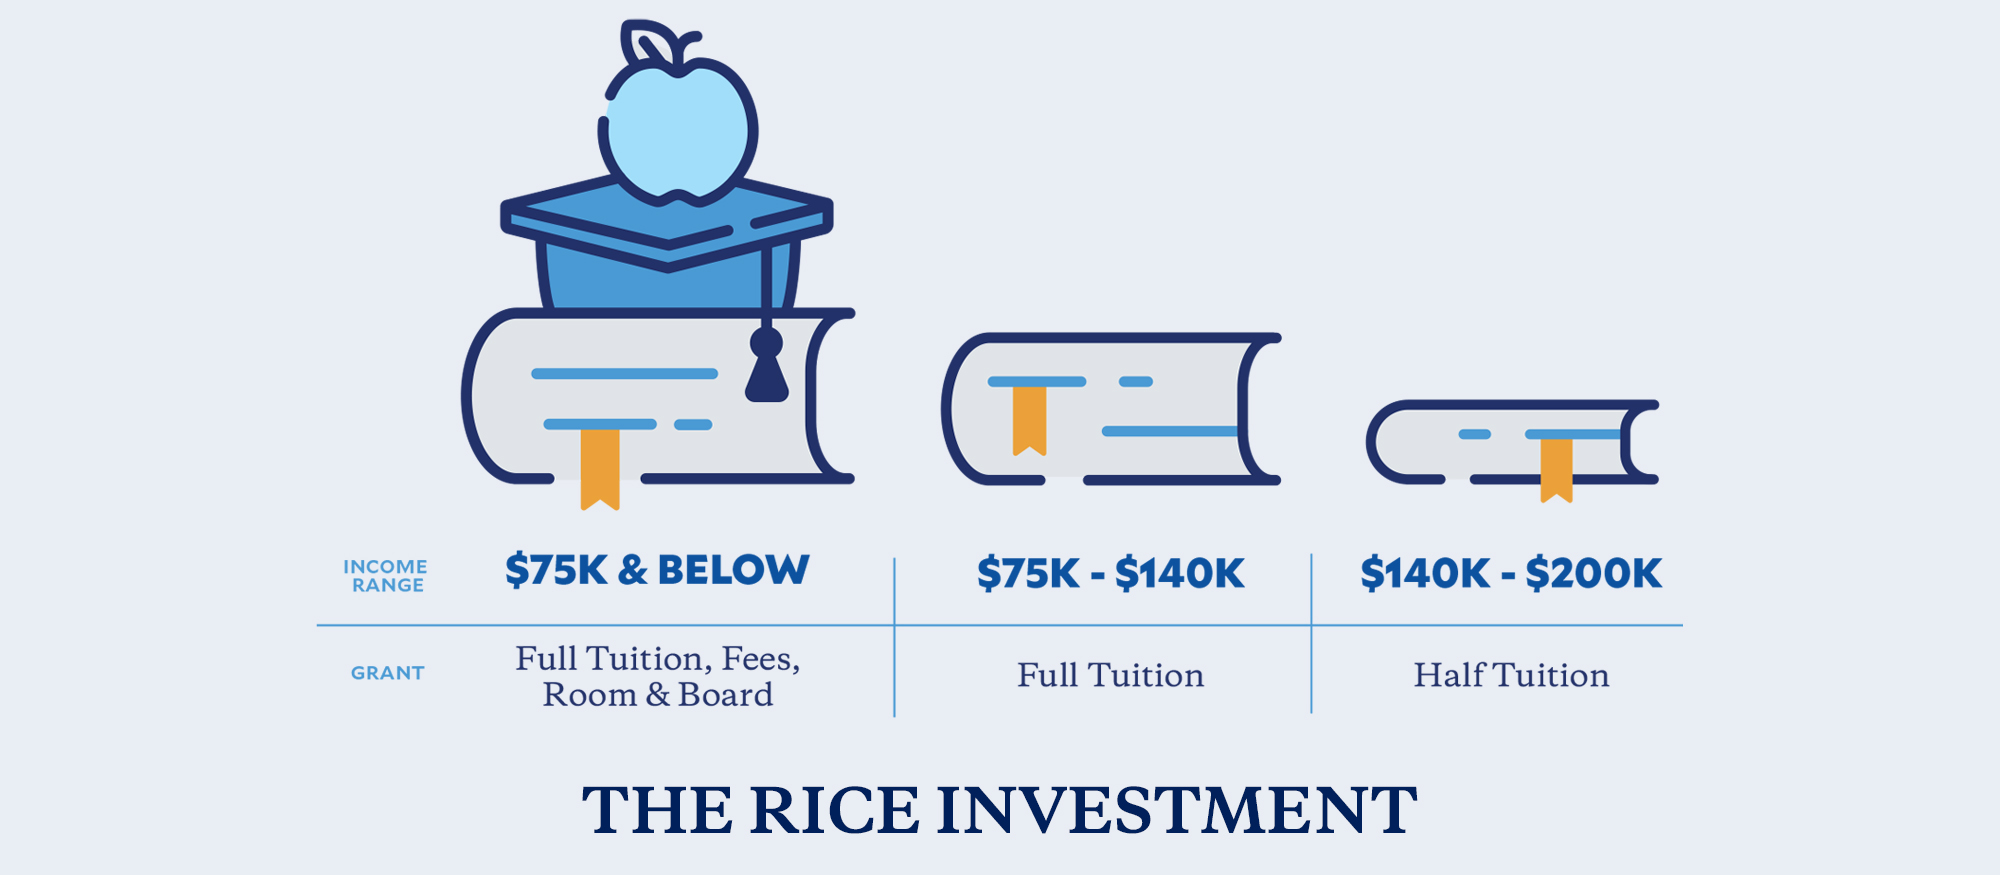 A graphic showing the income levels for the Rice Investment, as follows: $75k and below: Full Tuition, All Fees, Room & Board; $75k-$140k: Full Tuition; $140K-$200K: Half Tuition.